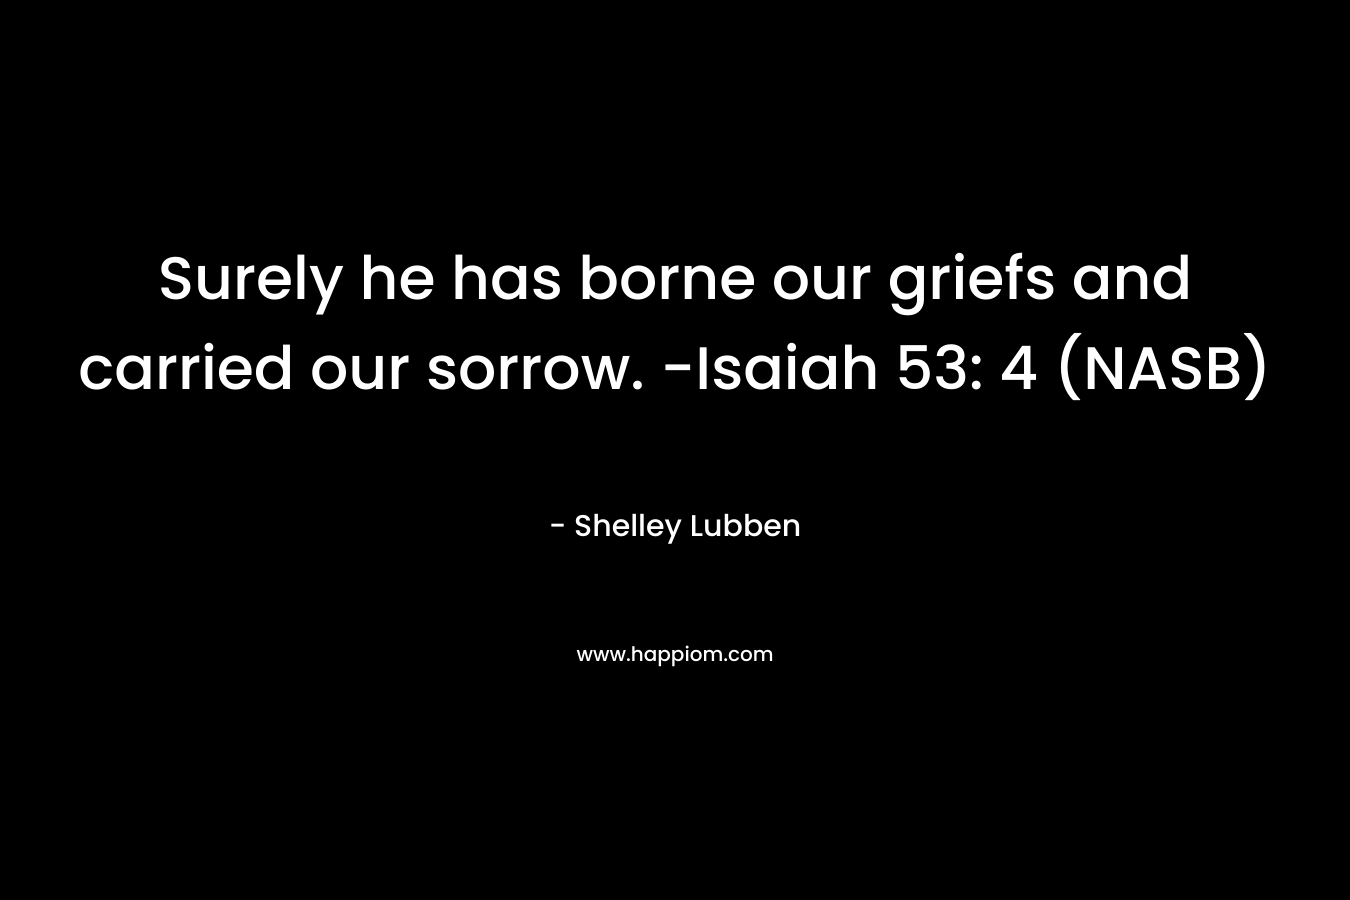 Surely he has borne our griefs and carried our sorrow. -Isaiah 53: 4 (NASB)